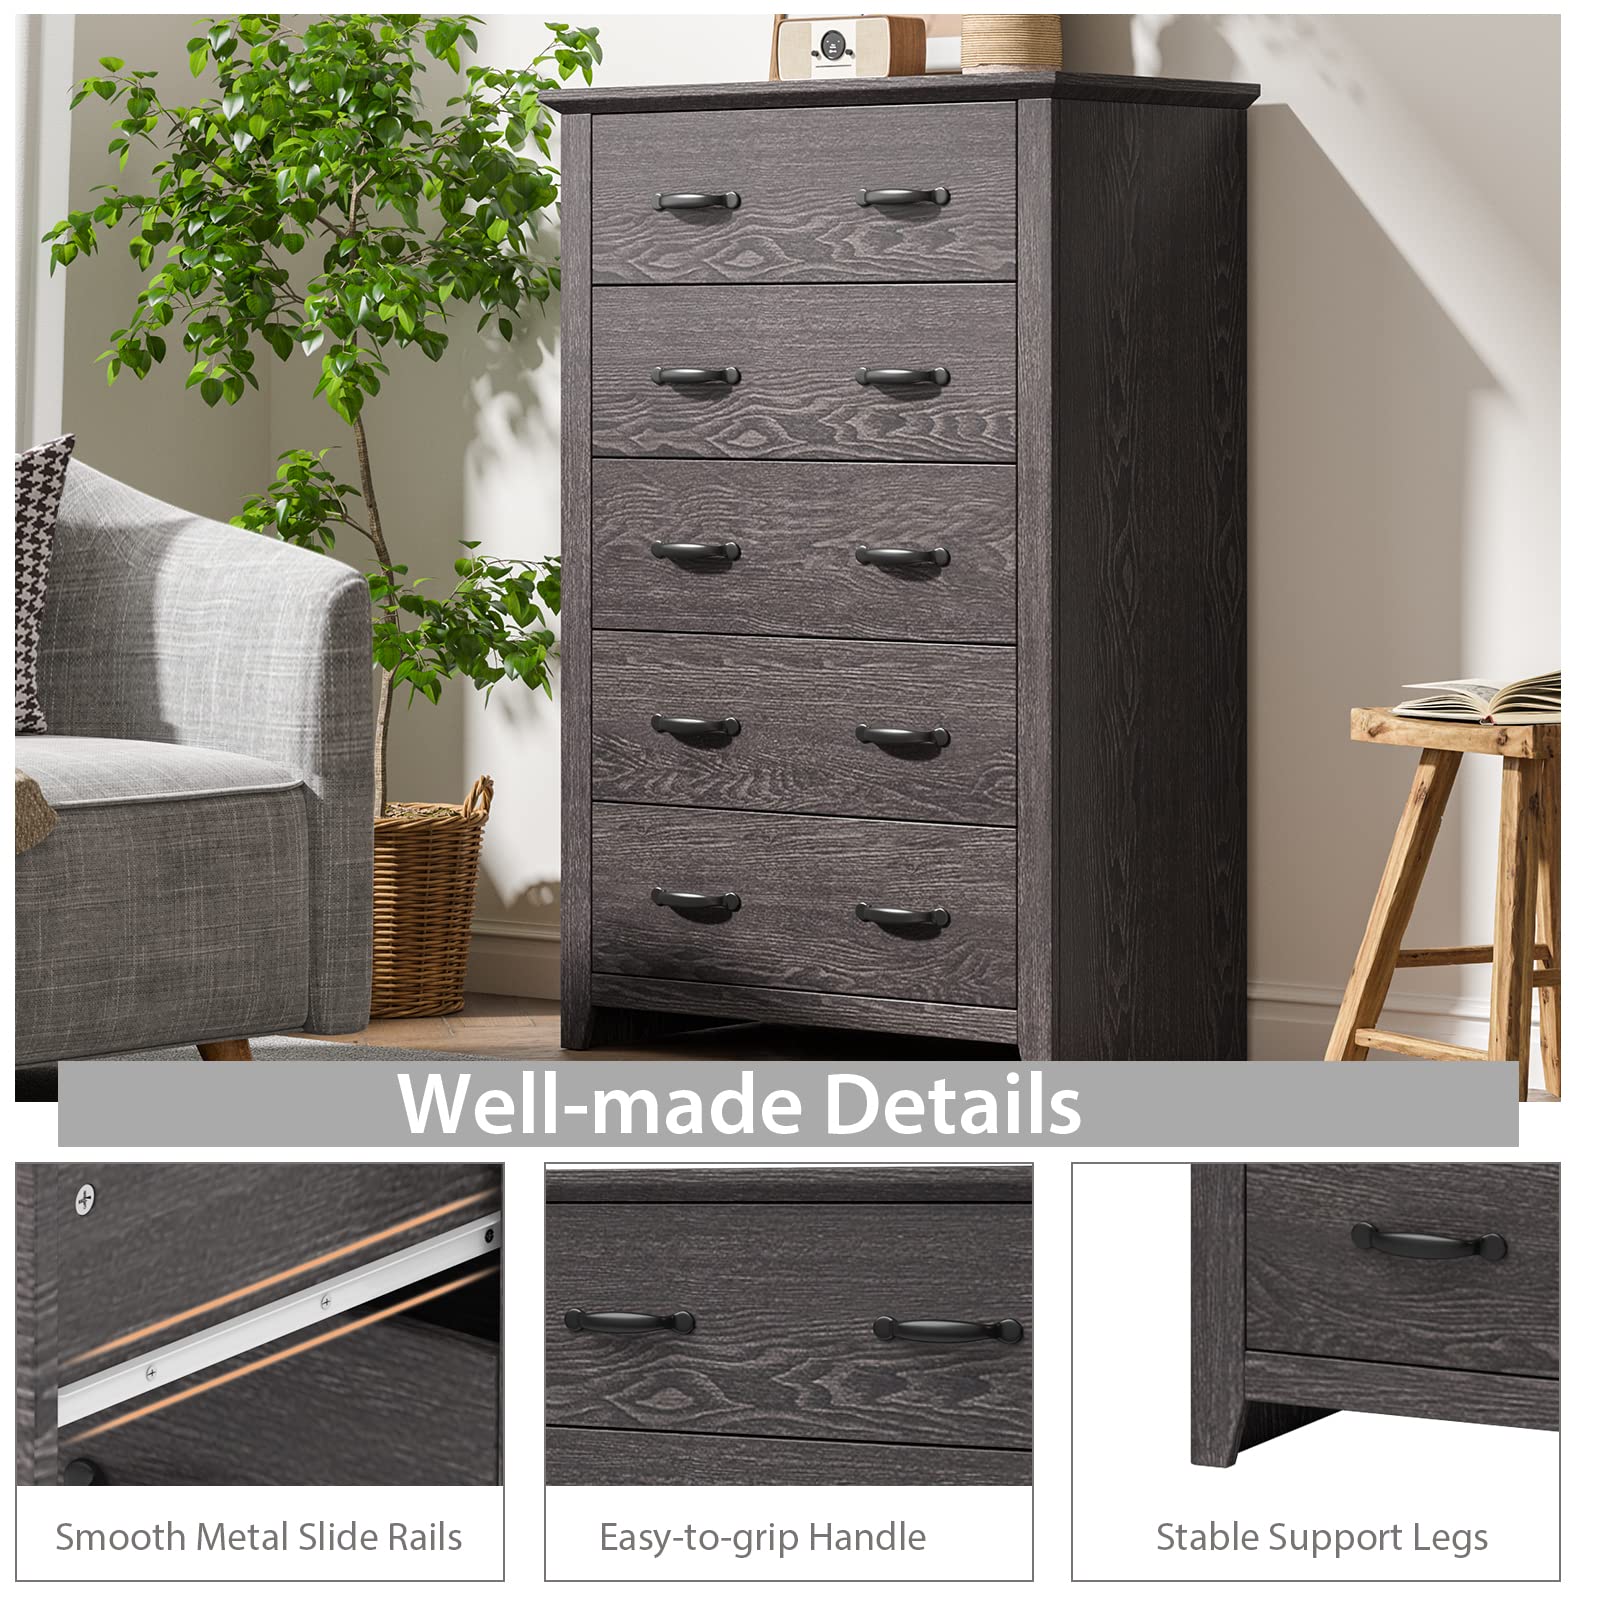 Giantex 5 Drawer Dresser Chest of Drawers - Vertical Dresser with 5 Pull-Out Drawers for Bedroom, Living Room, Entryway